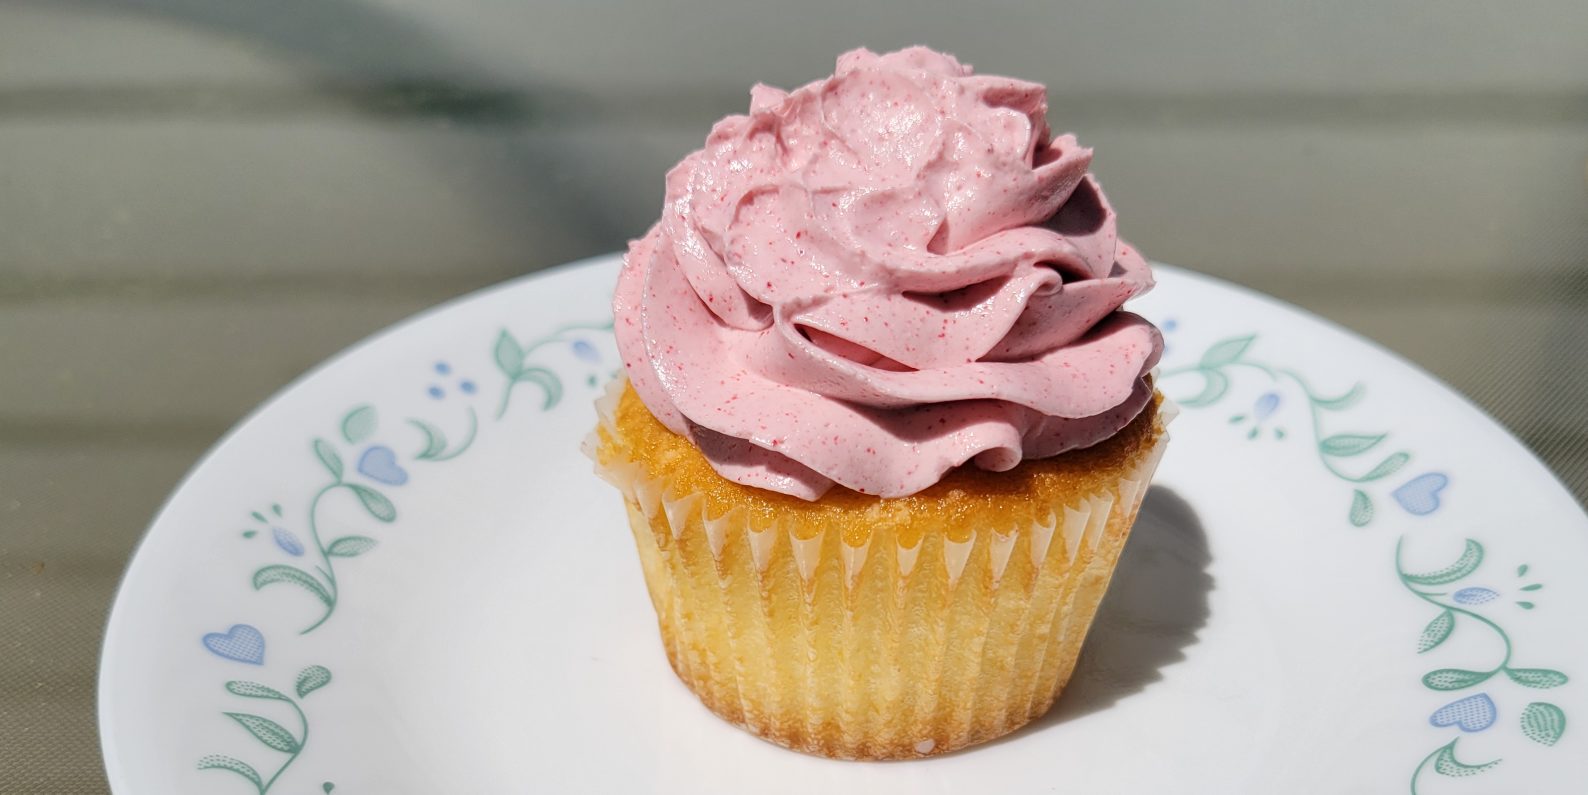 A lemon raspberry cupcake centered on a small white plate.